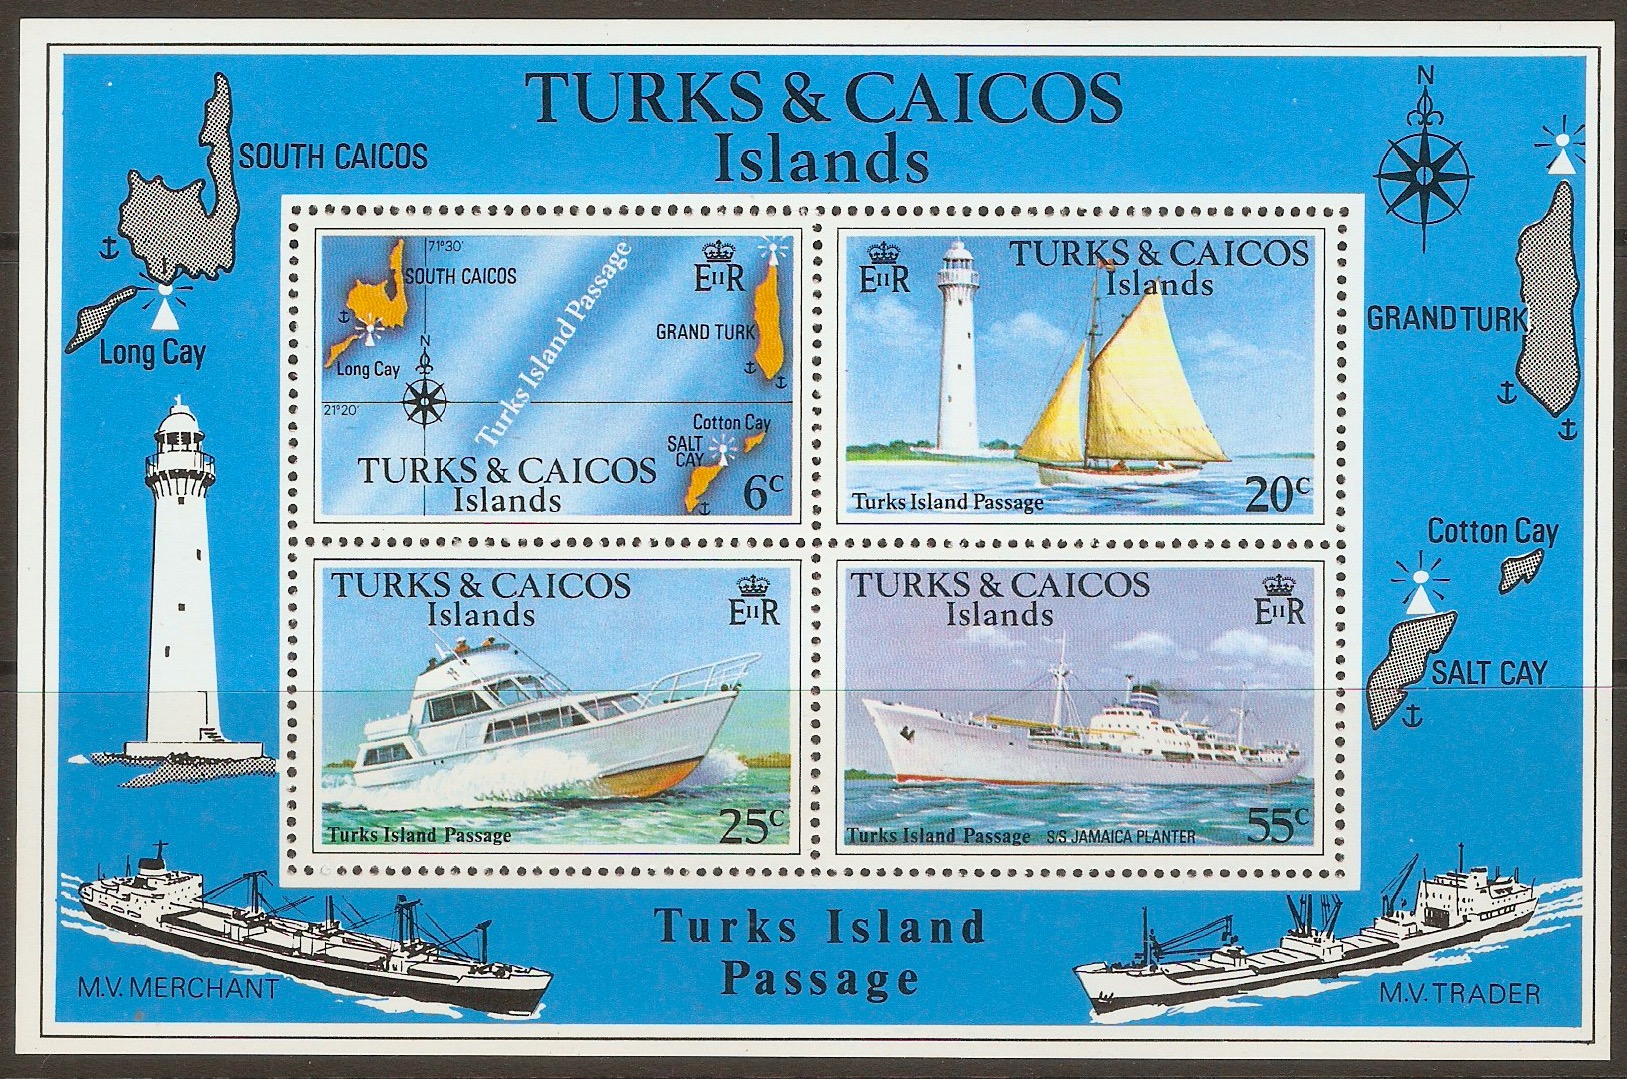 Turk and Caicos Islands 1978 Island Passage sheet. SGMS493A.